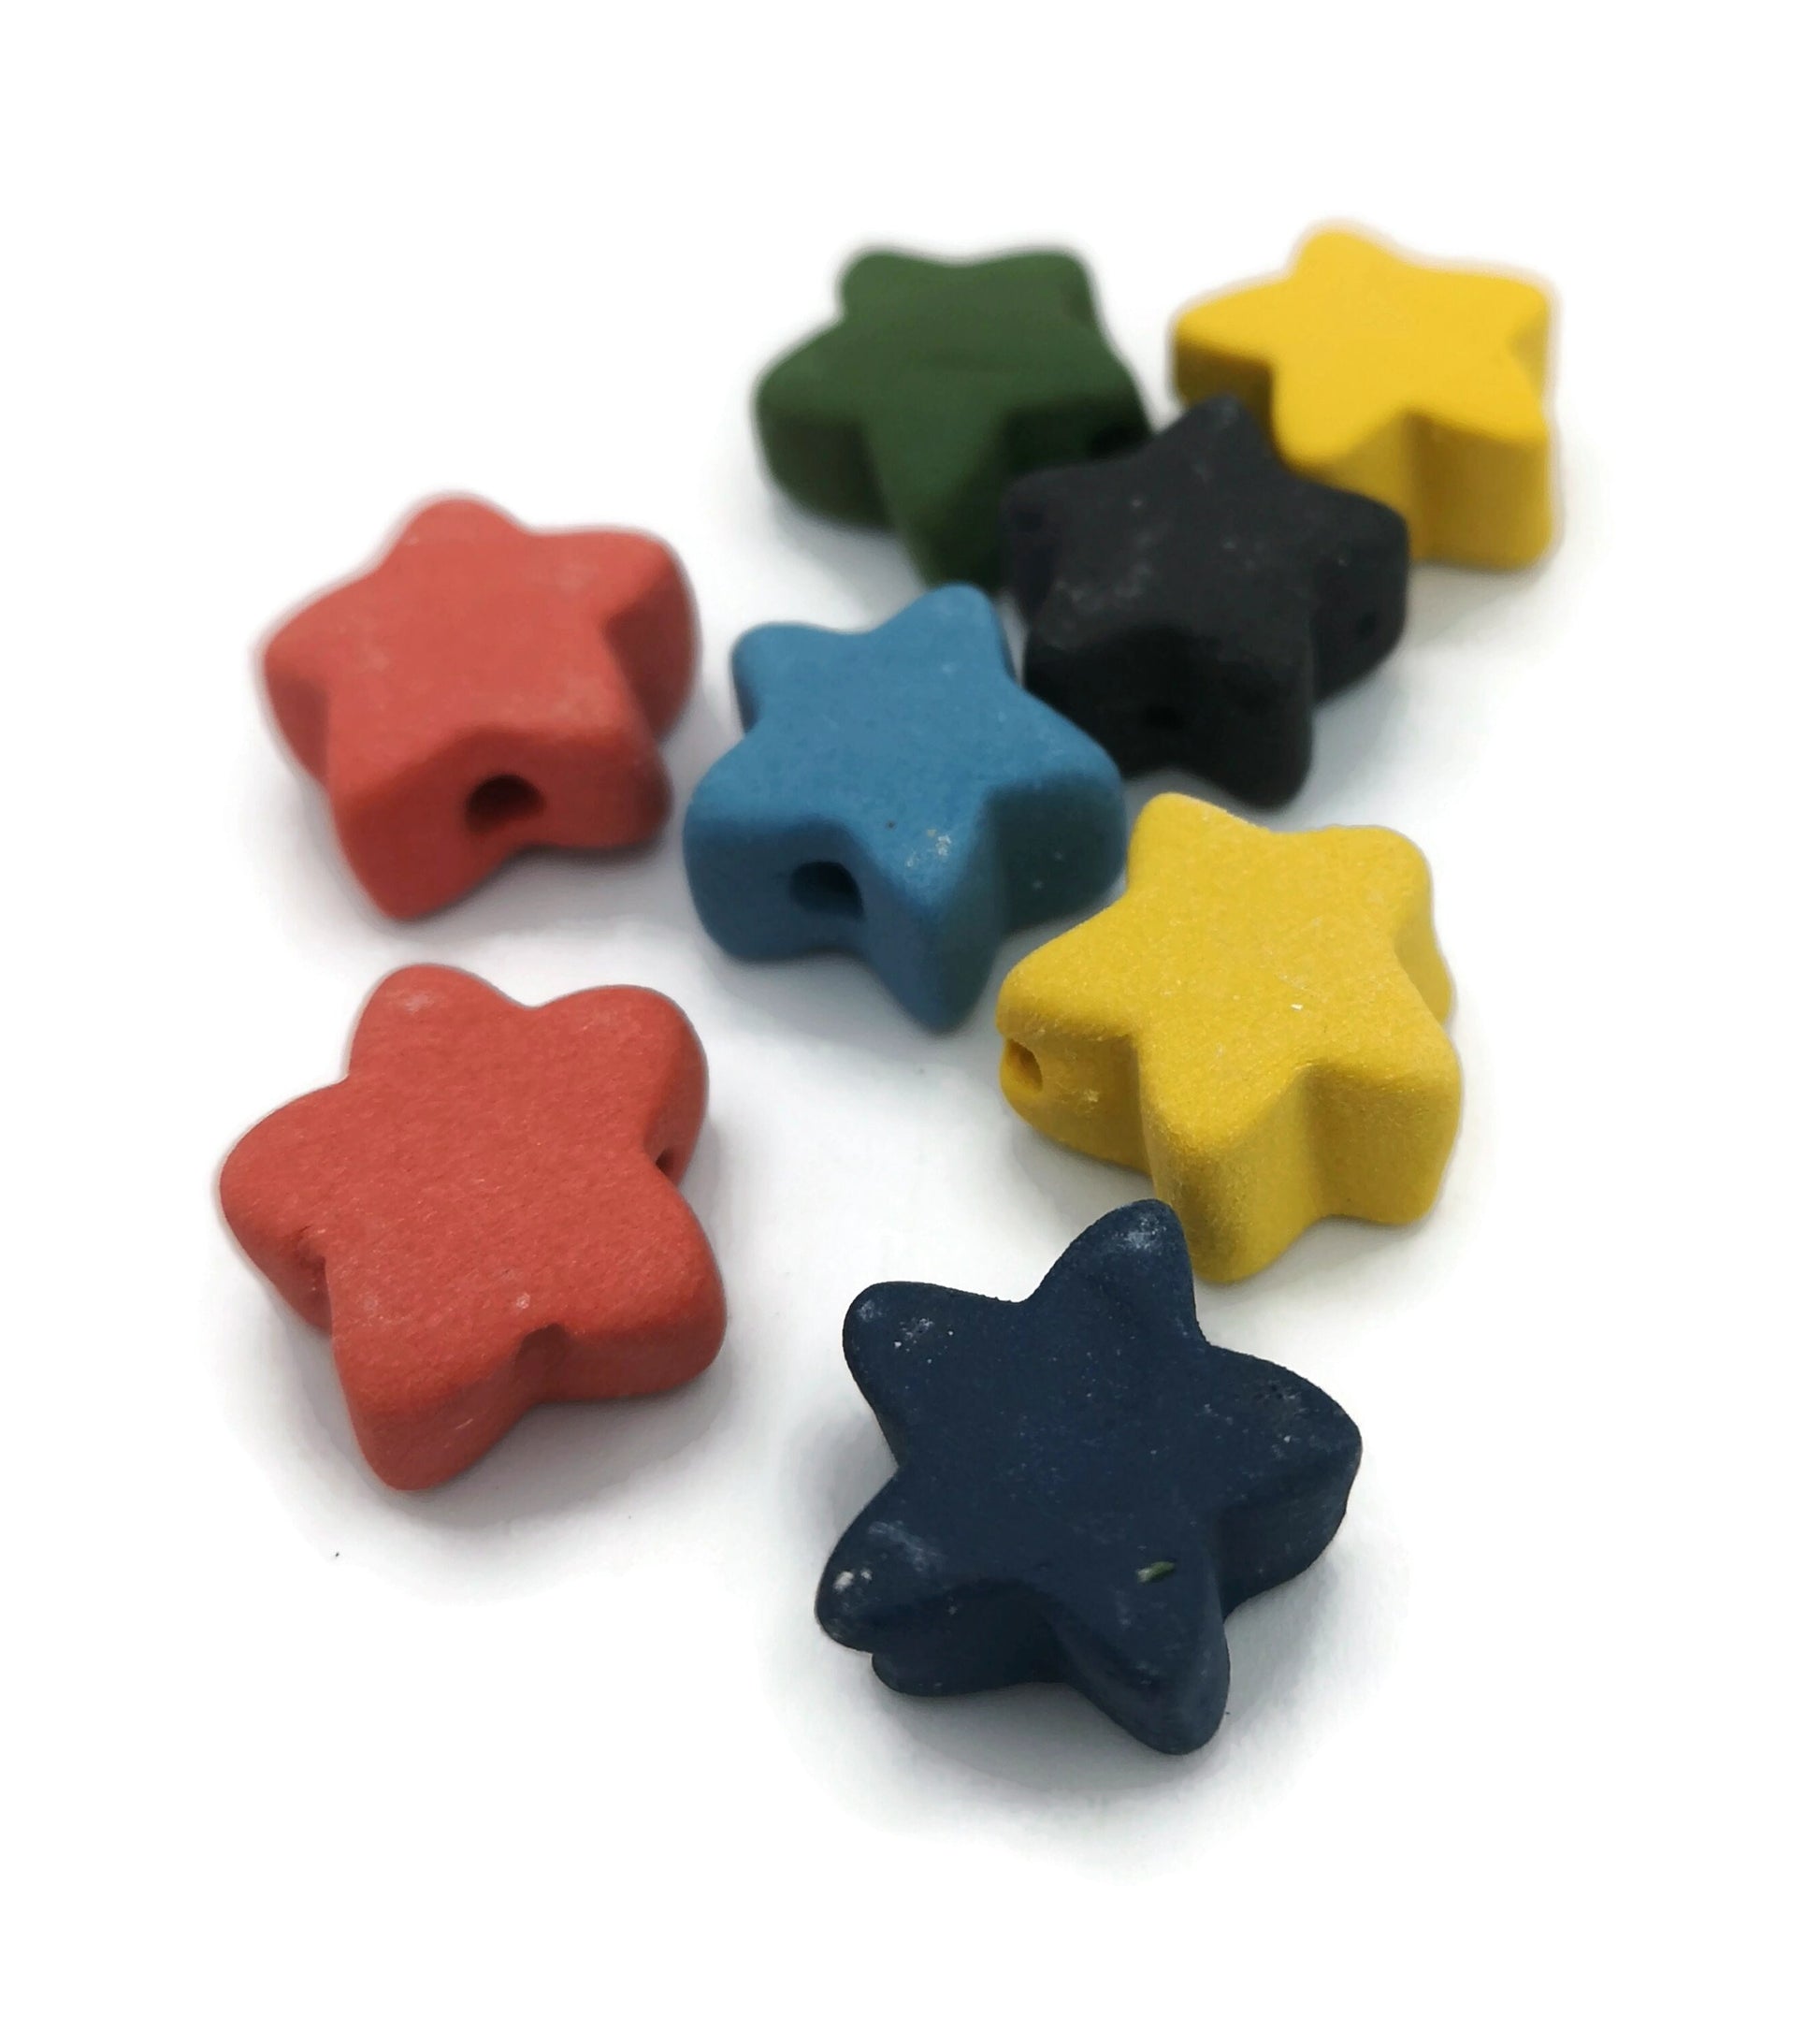 8 Pcs Handmade Ceramic Beads Ready To Ship, Cute Star Shape Assorted Beads For Jewelry Making, Unique Clay Spacer Beads, Most Sold Items - Ceramica Ana Rafael